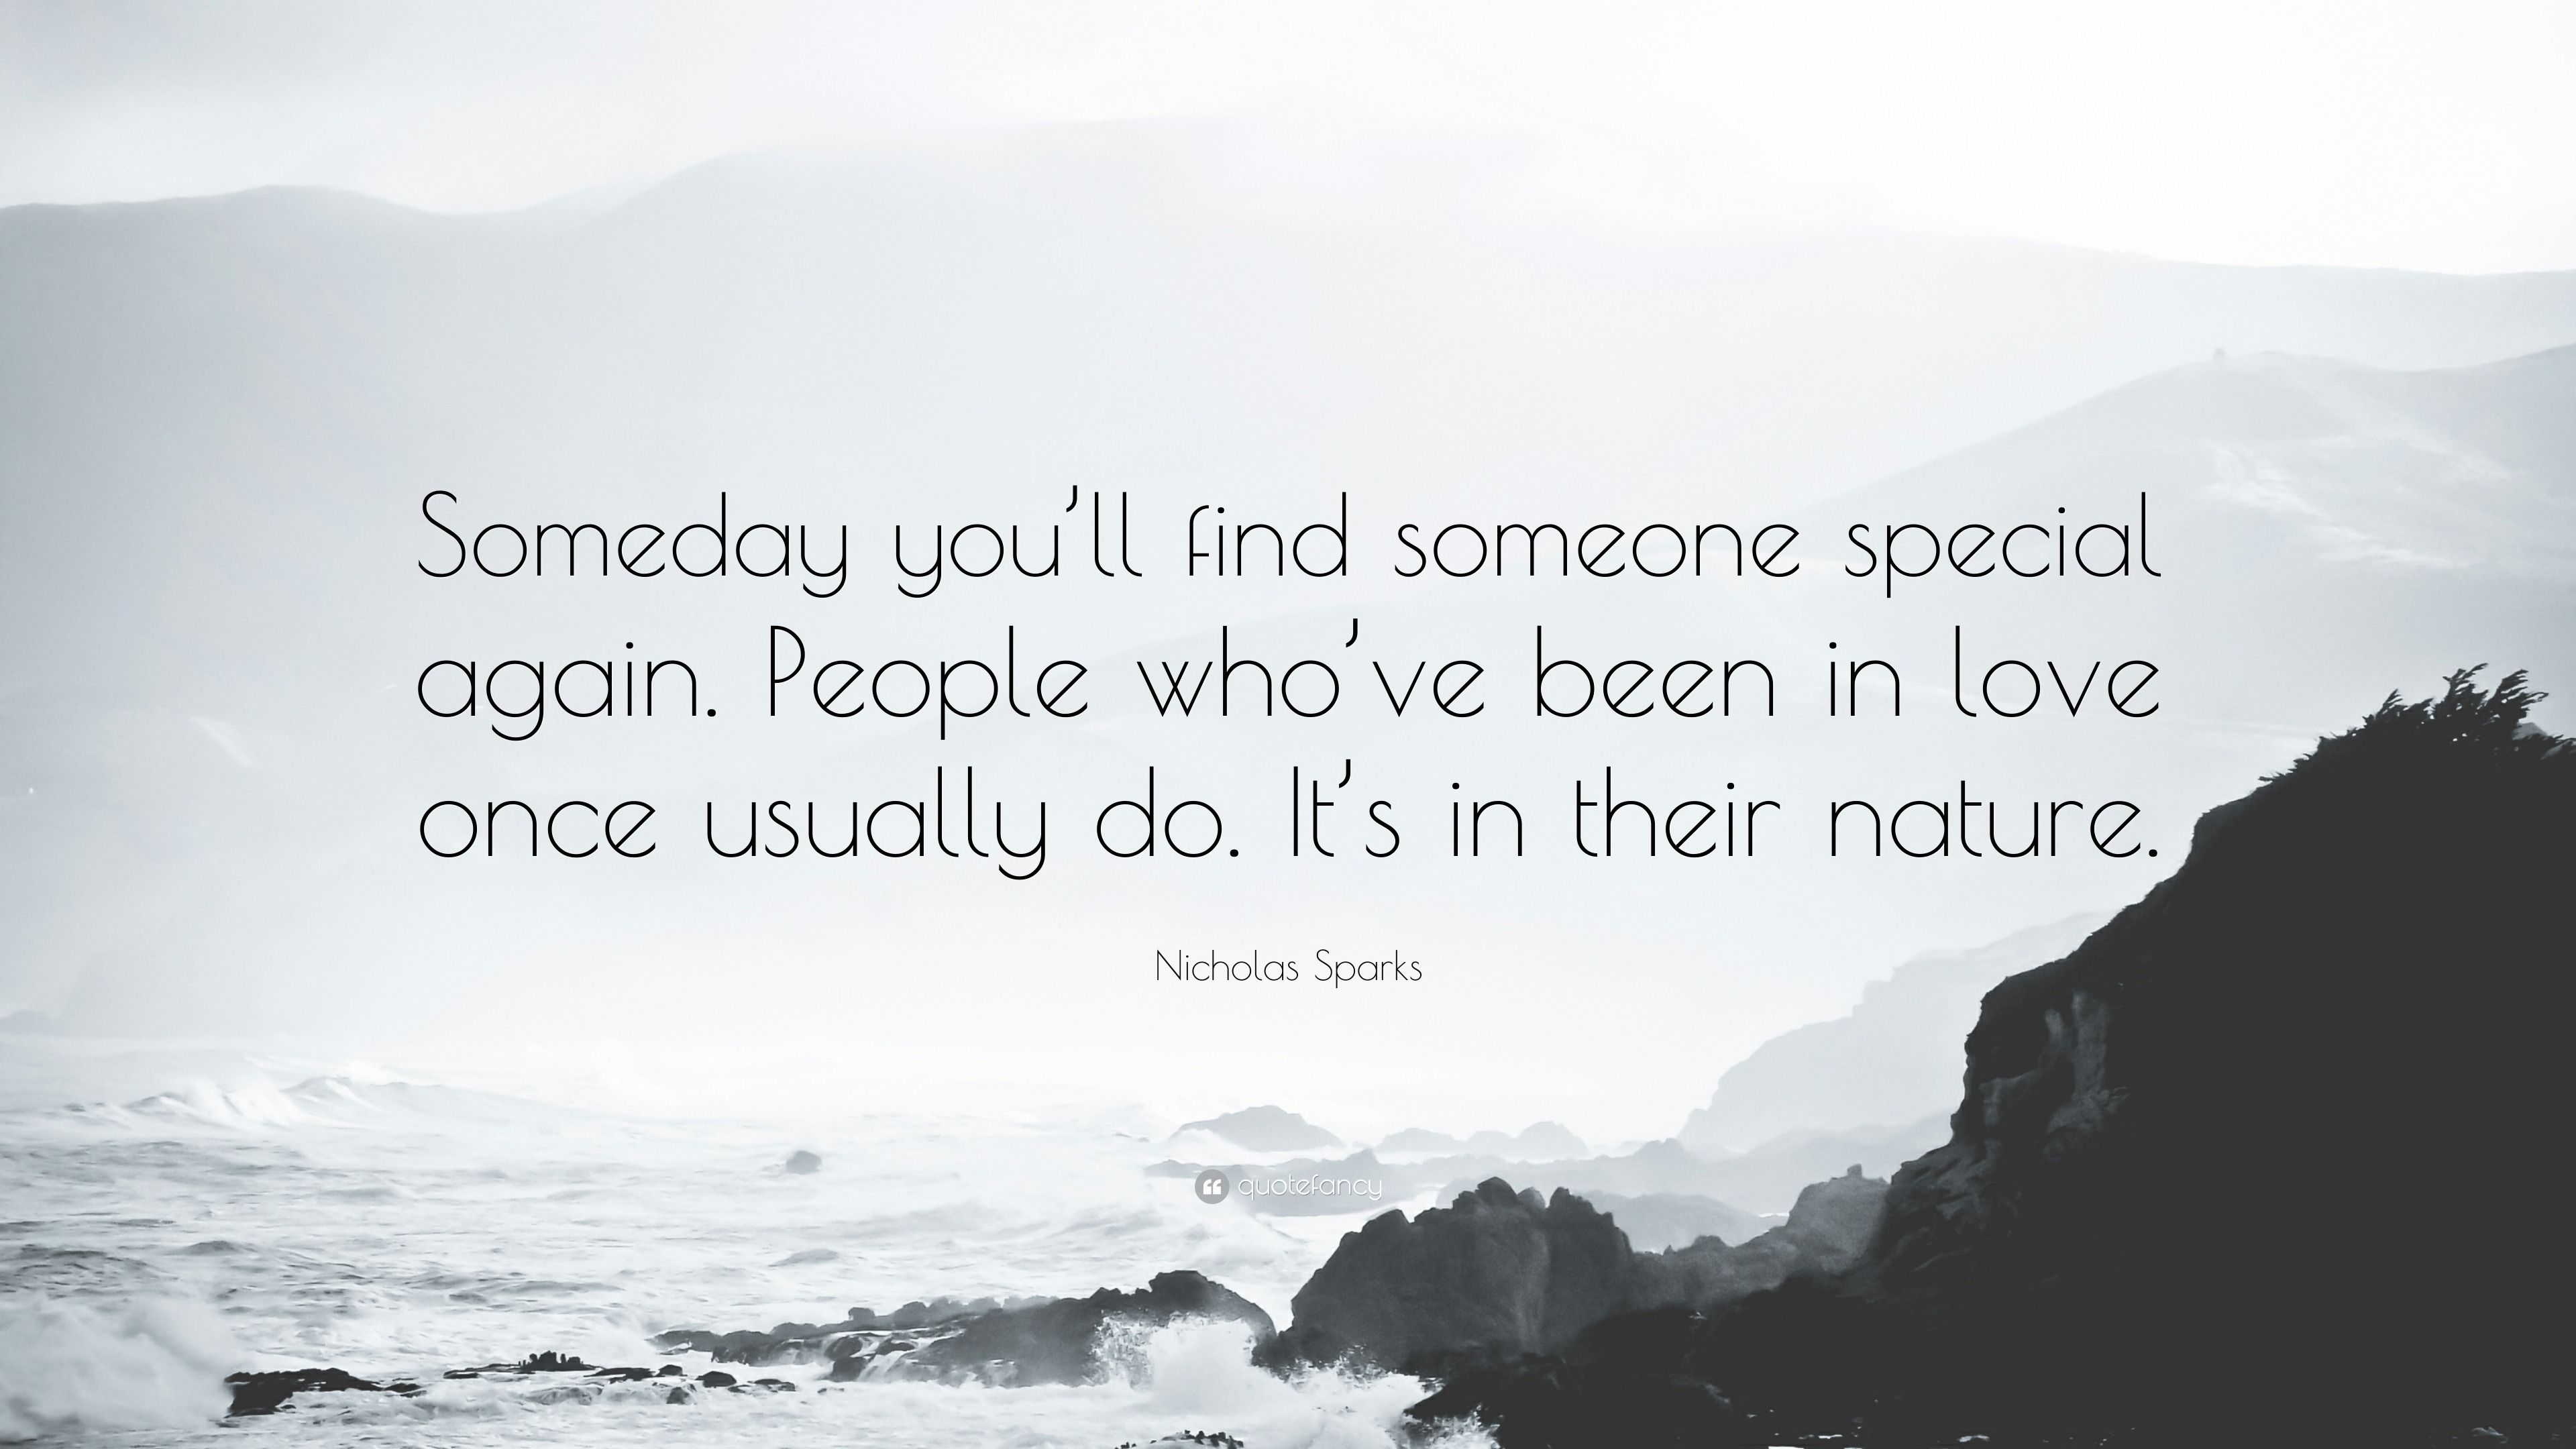 Nicholas Sparks Quote “Someday you ll find someone special again People who